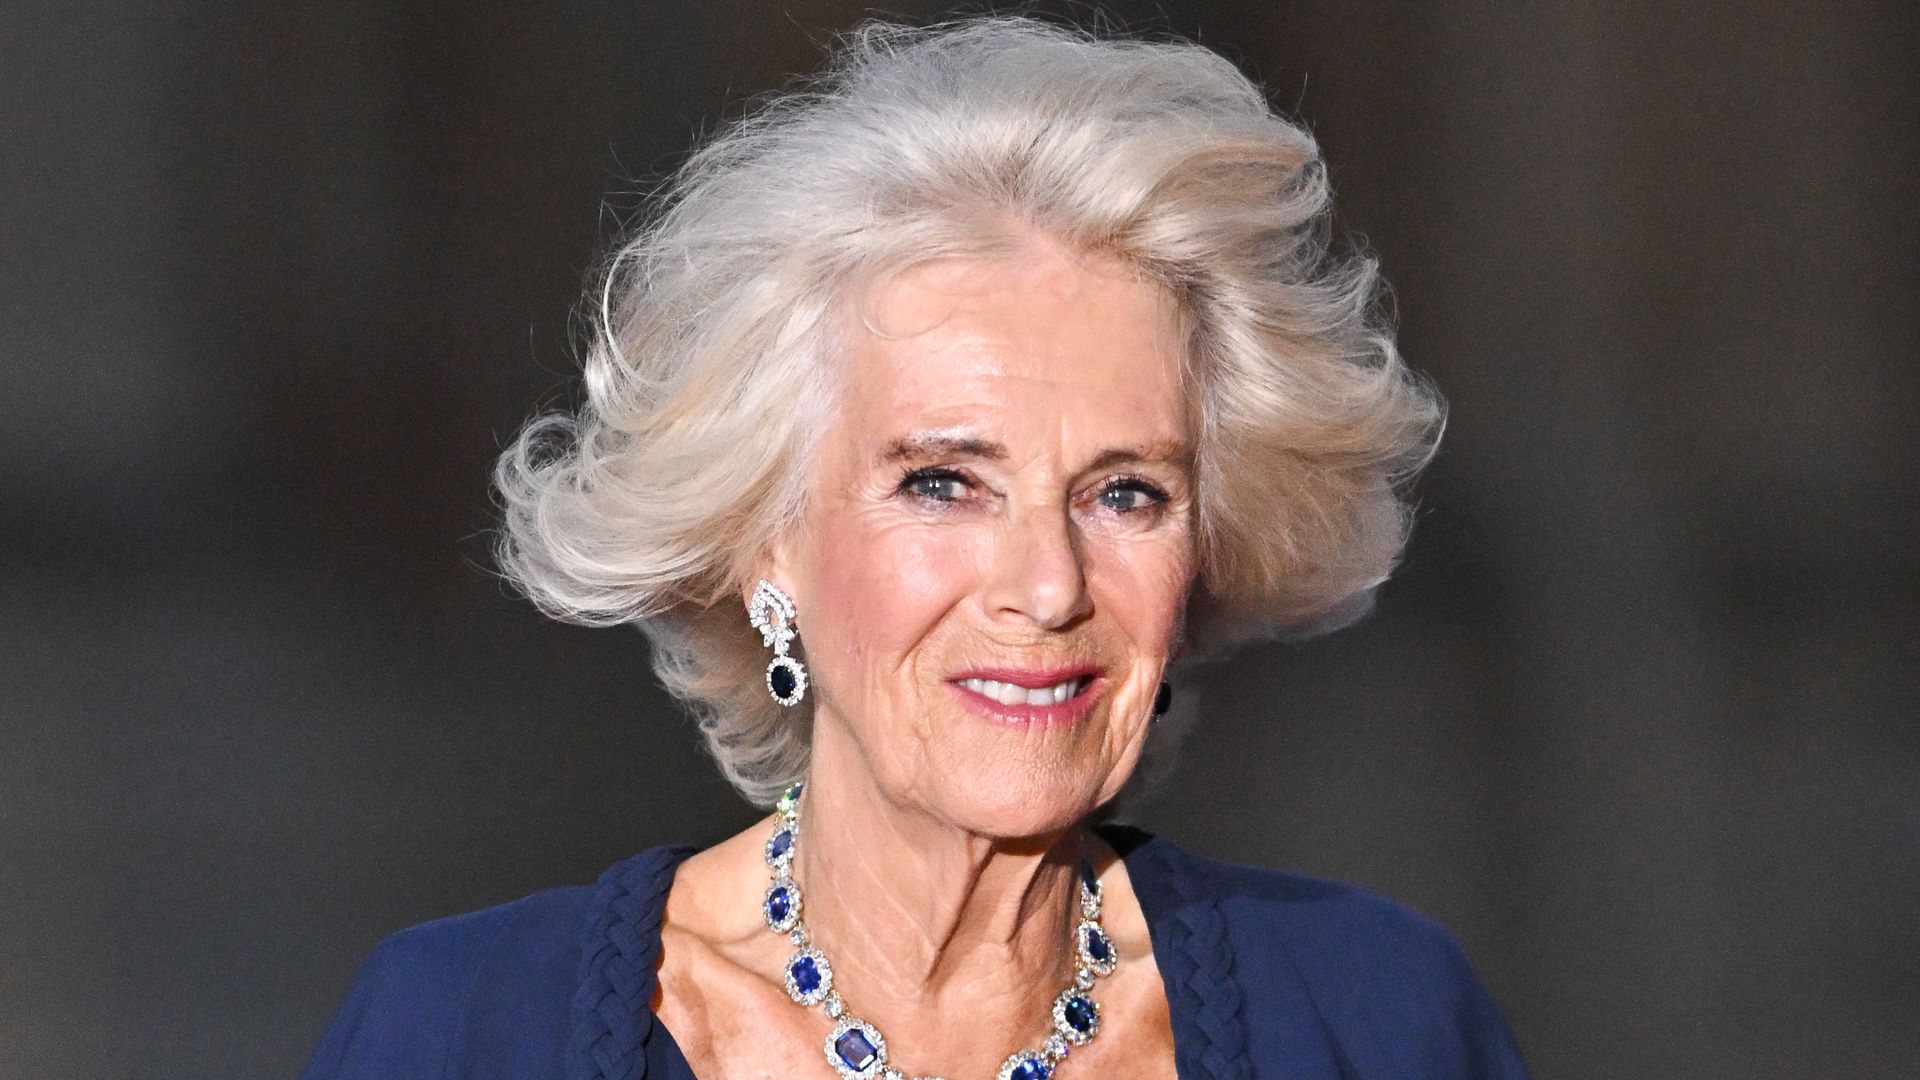 ueen Camilla arrives at the Palace of Versailles ahead of the State Dinner held in honor of King Charles III and Queen Camilla in the Hall of Mirrors of the Palace of Versailles on September 20, 2023 in Versailles, France. 